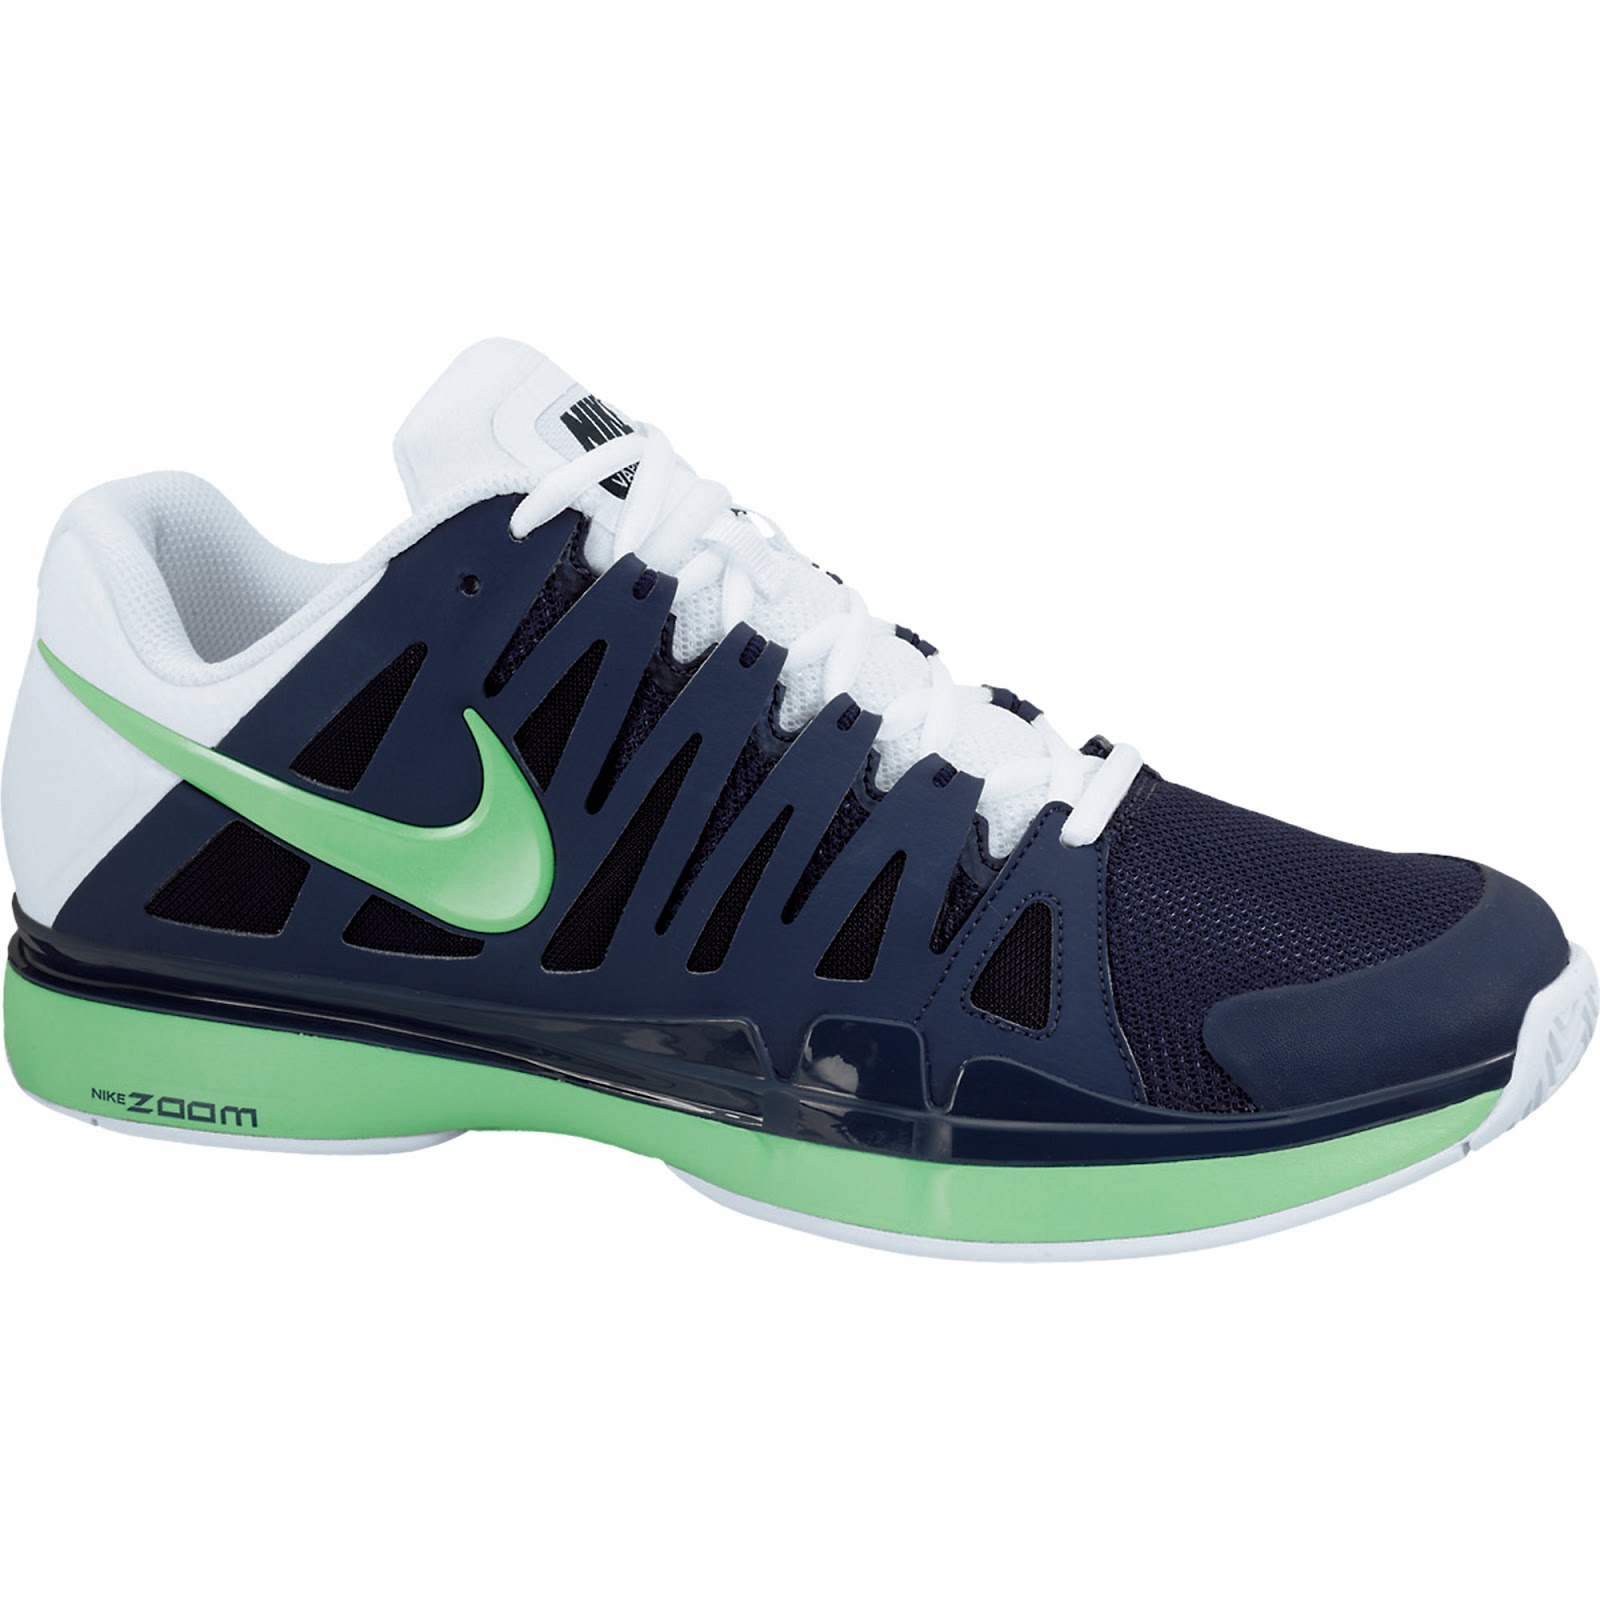 Tennis Blog UK: As fast as Roger with the Nike Air Zoom Vapor Tour ...